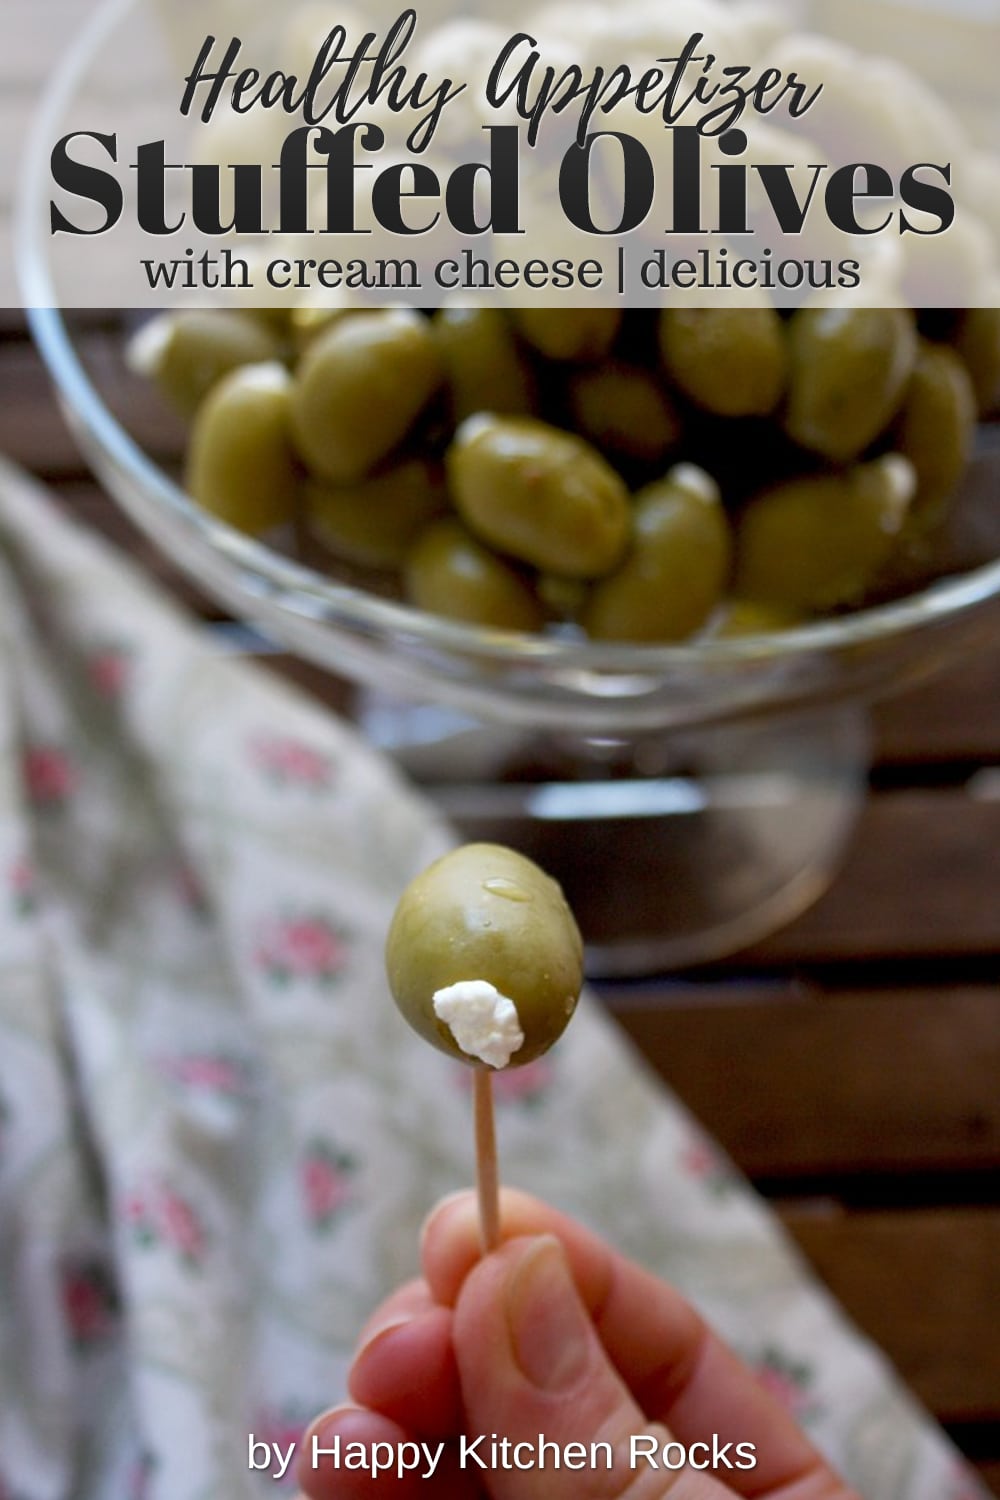 Cream Cheese Stuffed Olives - One Olive Collage with Text Overlay